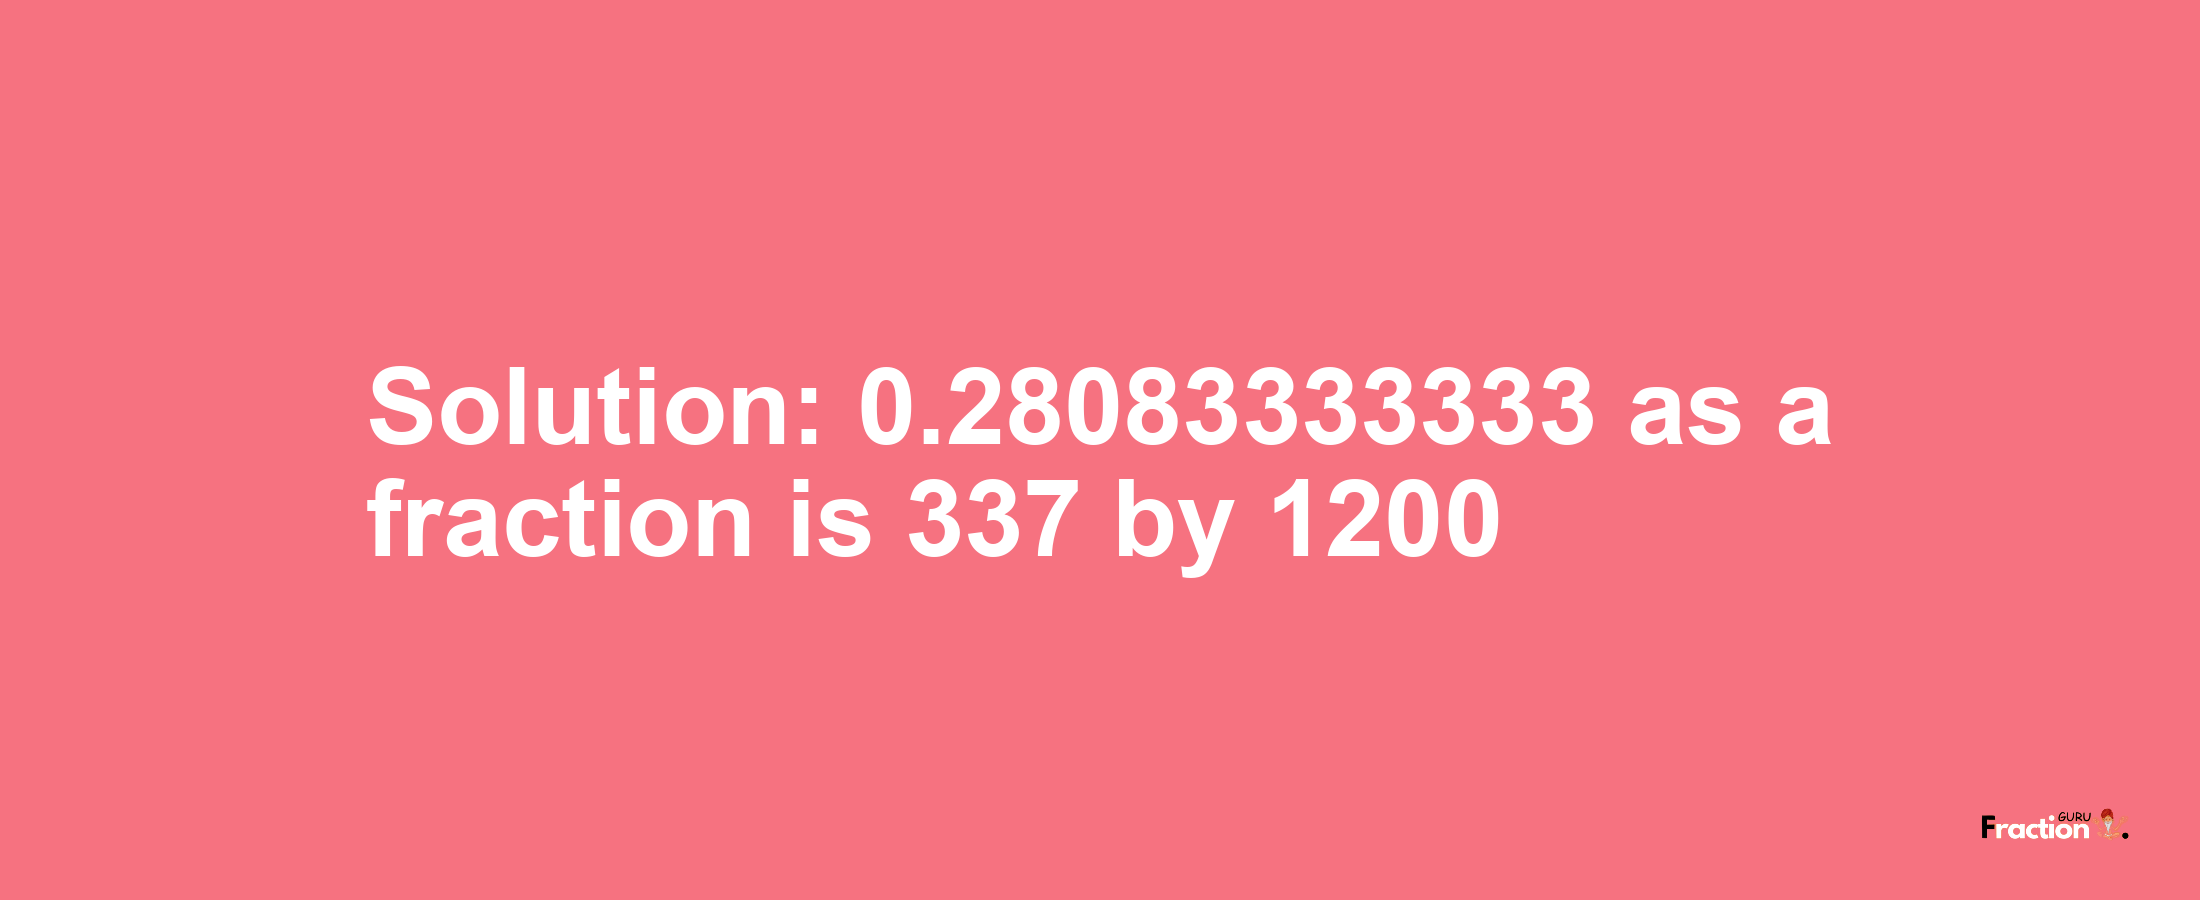 Solution:0.28083333333 as a fraction is 337/1200